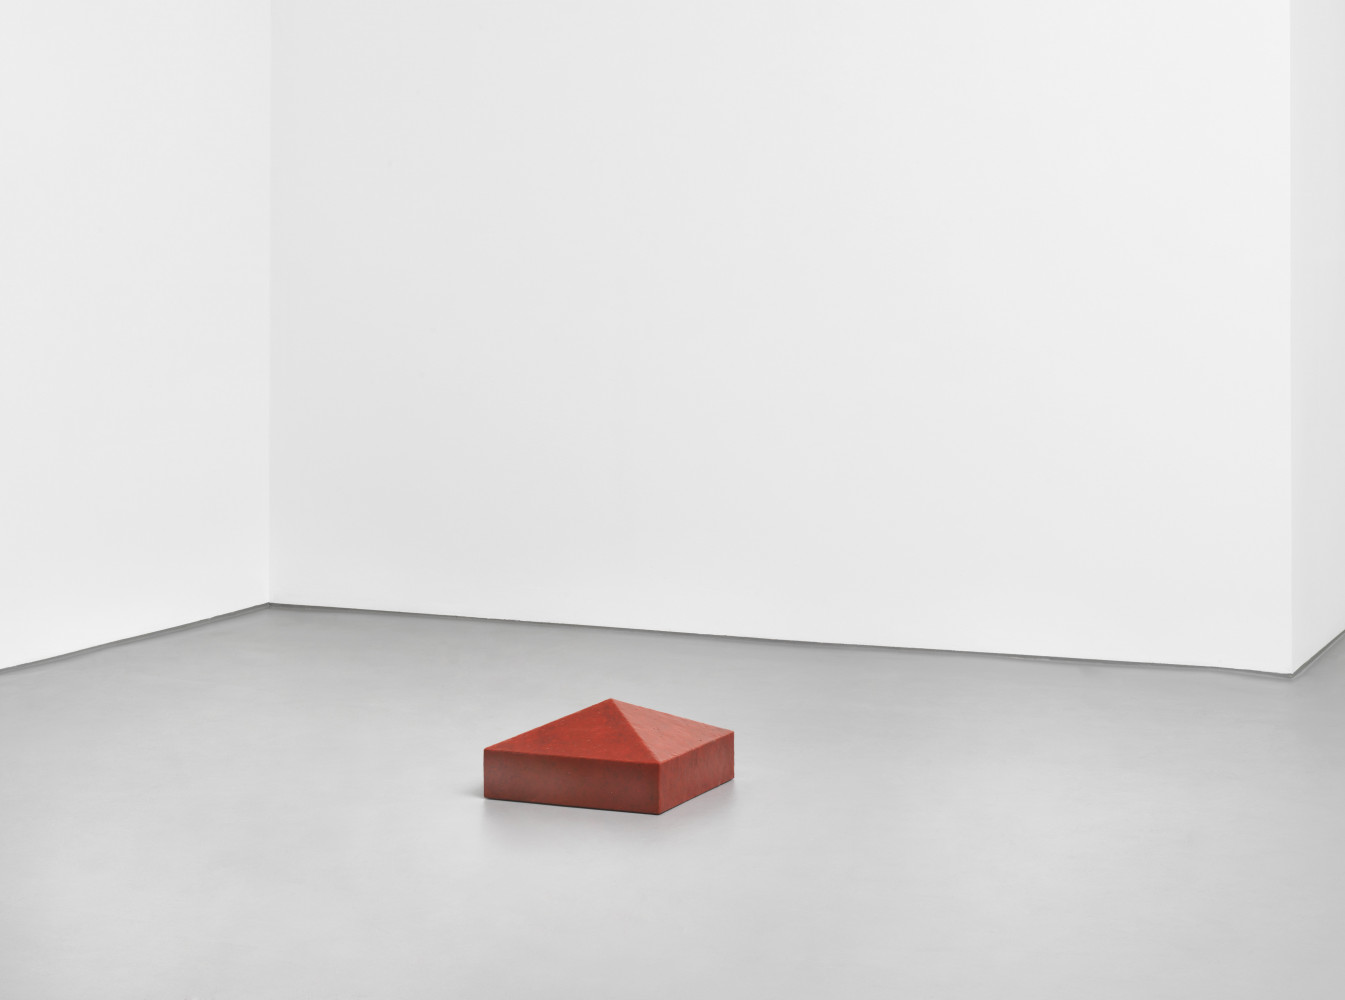 Sculpture Rice House by Wolfgang Laib in the Buchmann Galerie 2022